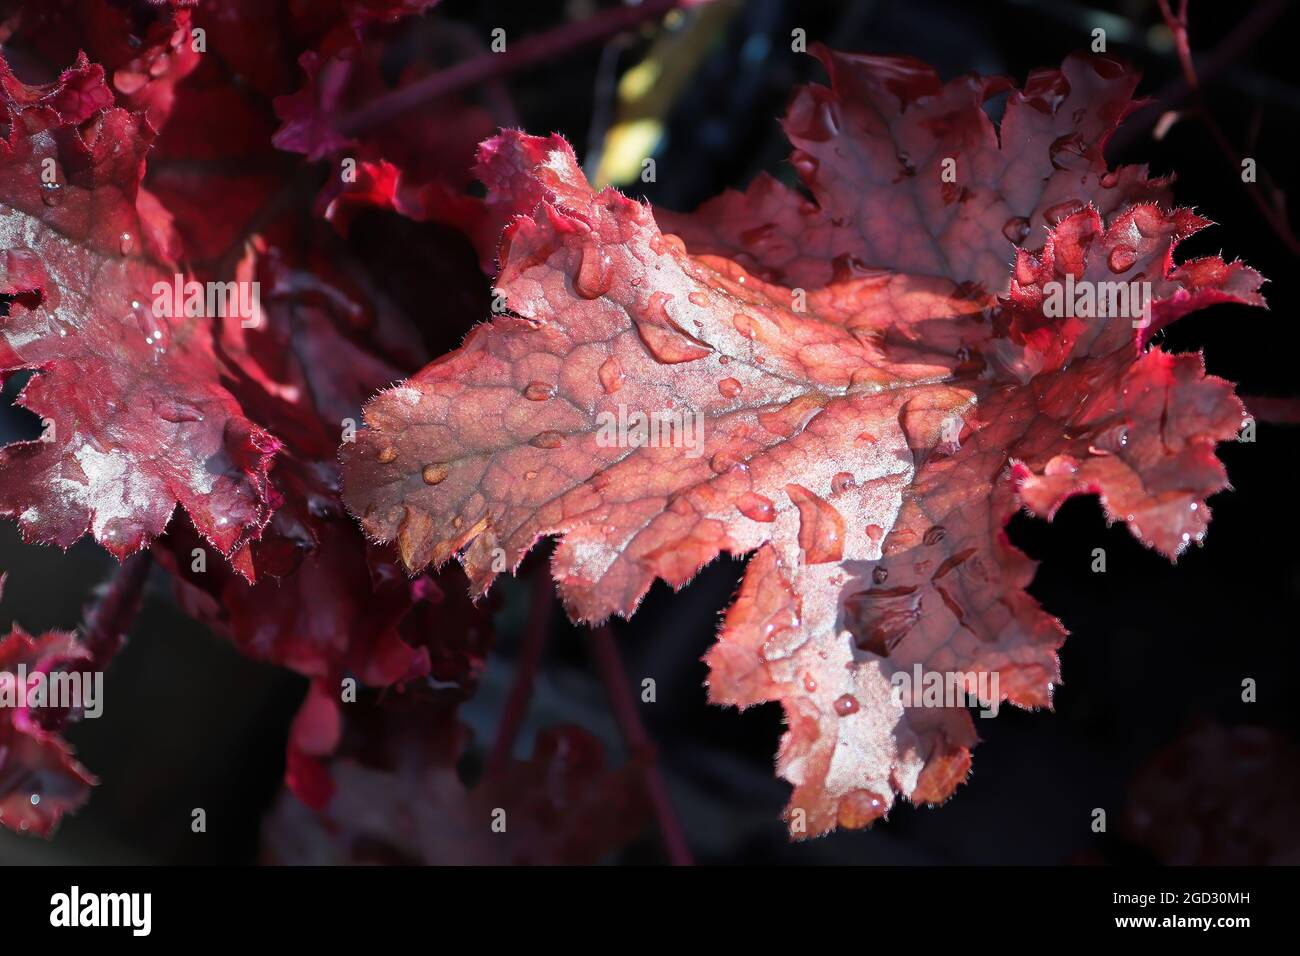 Closeup of the burgandy leaves on a coral bell plant Stock Photo